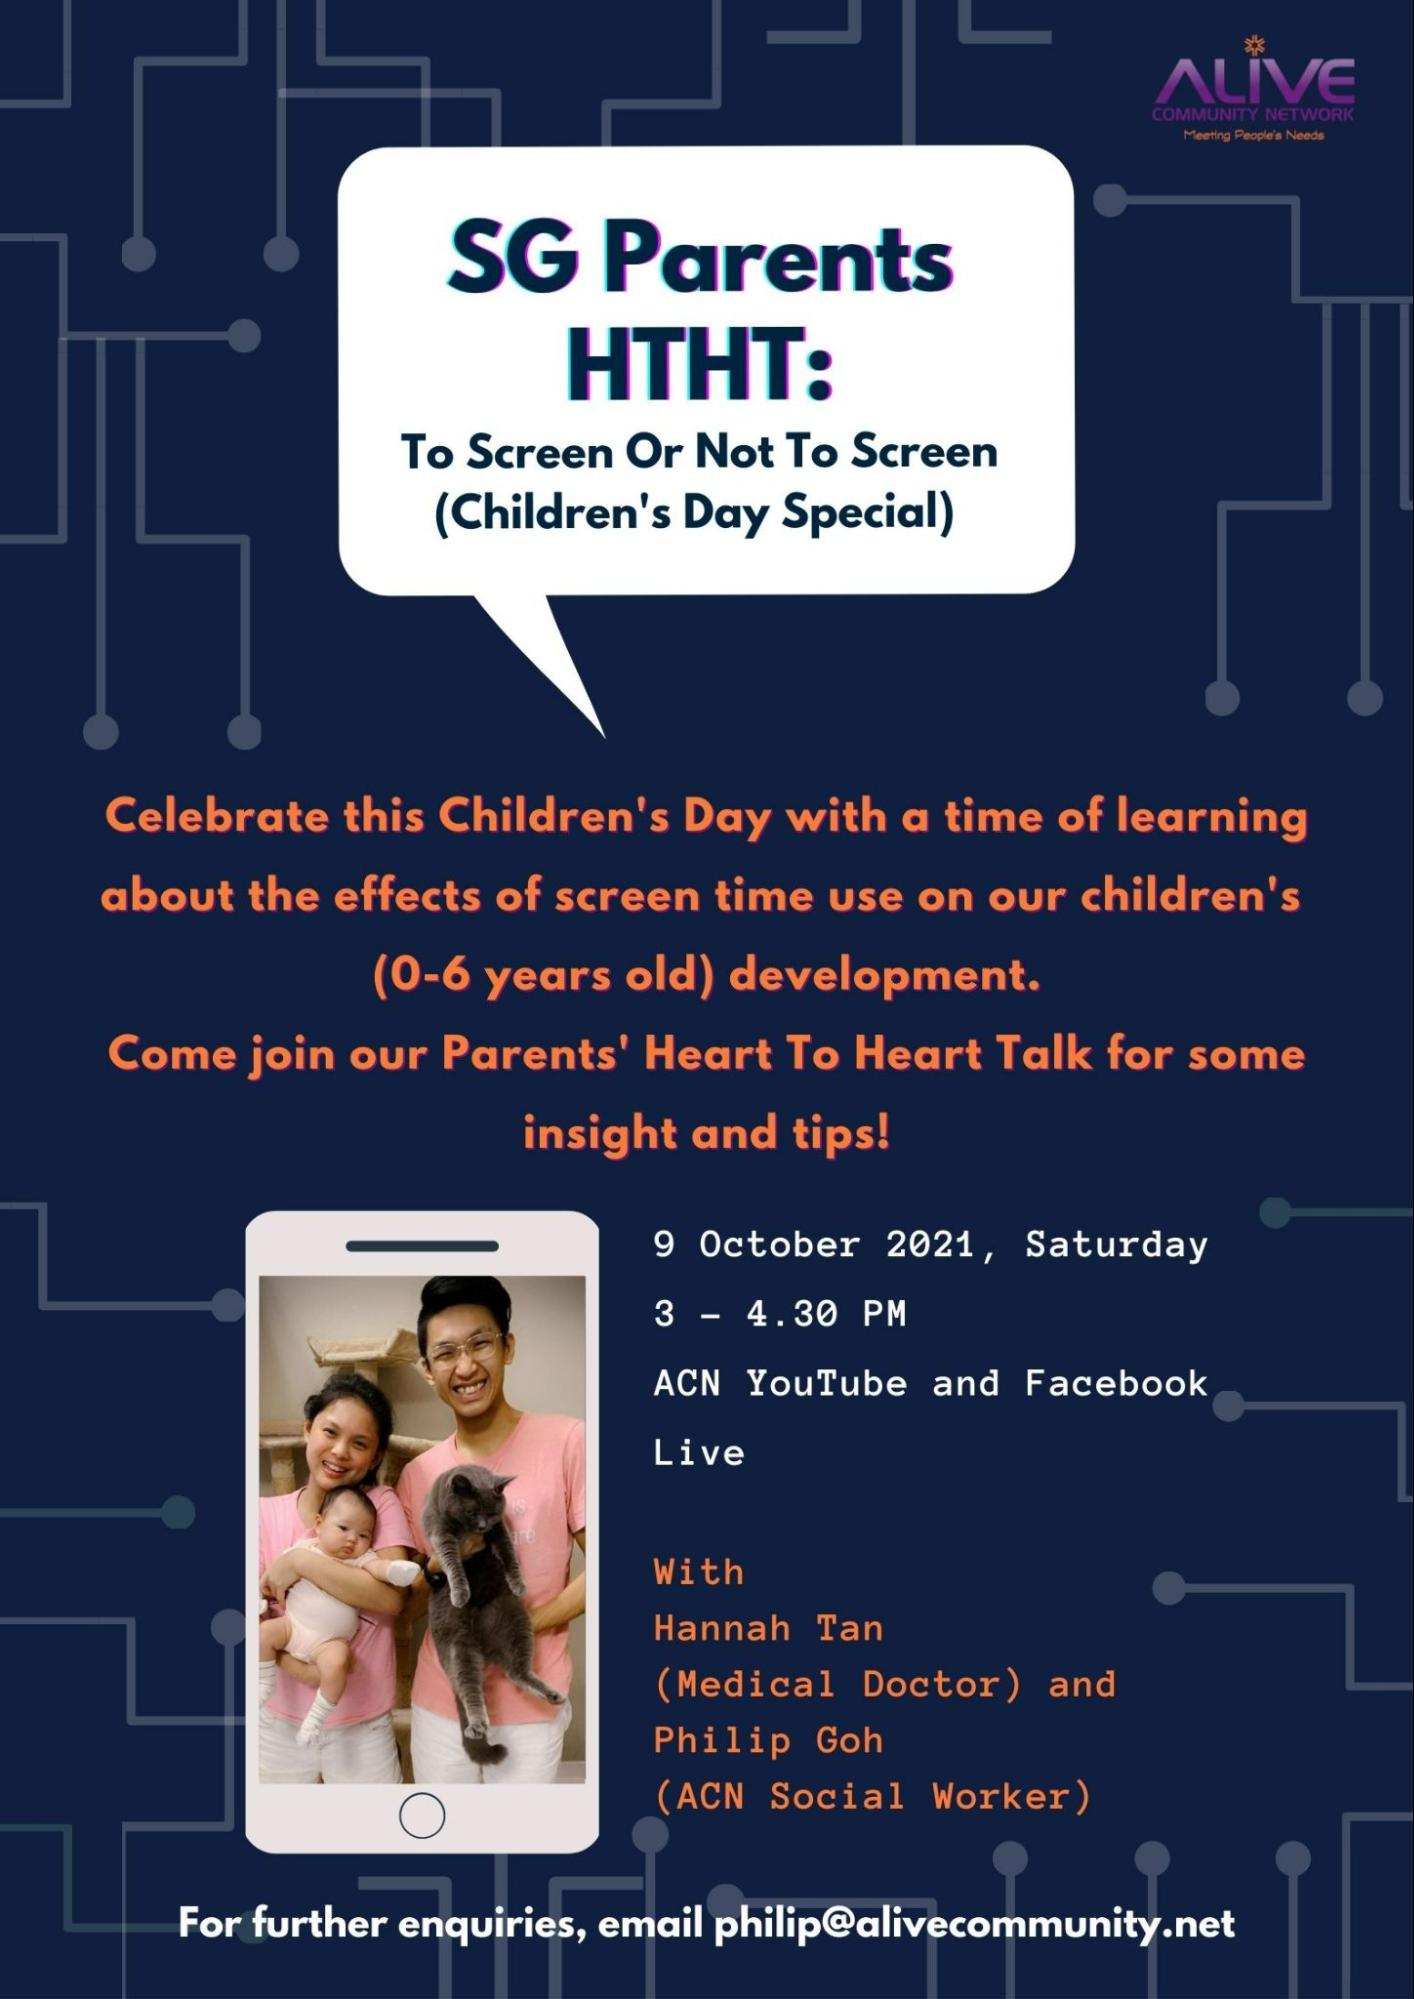 5. 9 Oct 2021- SG Parents HTHT: To Screen Or Not To Screen (Children’s Day Special)